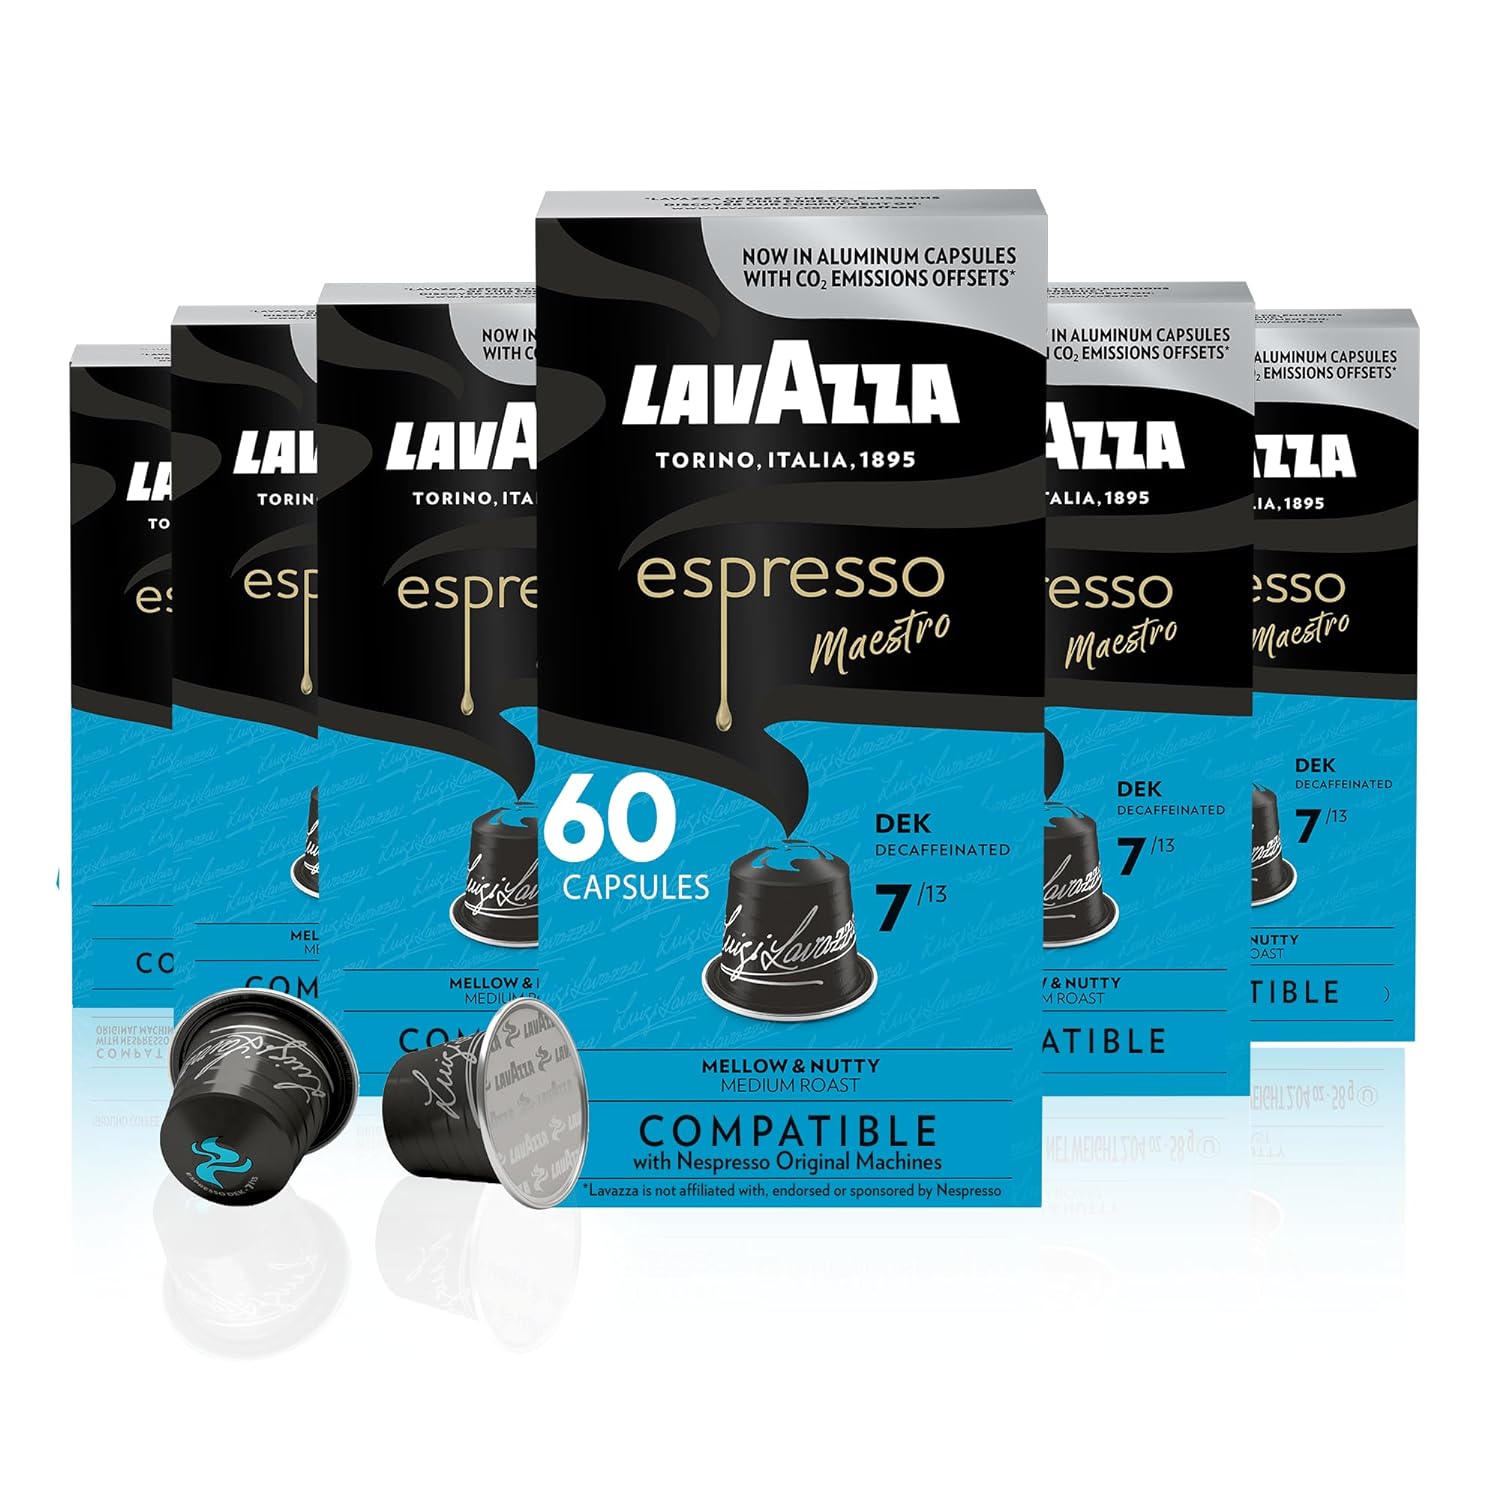 Lavazza Decaffeinato Ricco Espresso Dark Roast Capsules Compatible with Nespresso Original Machines Blended and roasted in Italy, Decaffeinated with sweet, Rich flavor, 10 Count (Pack of 6)